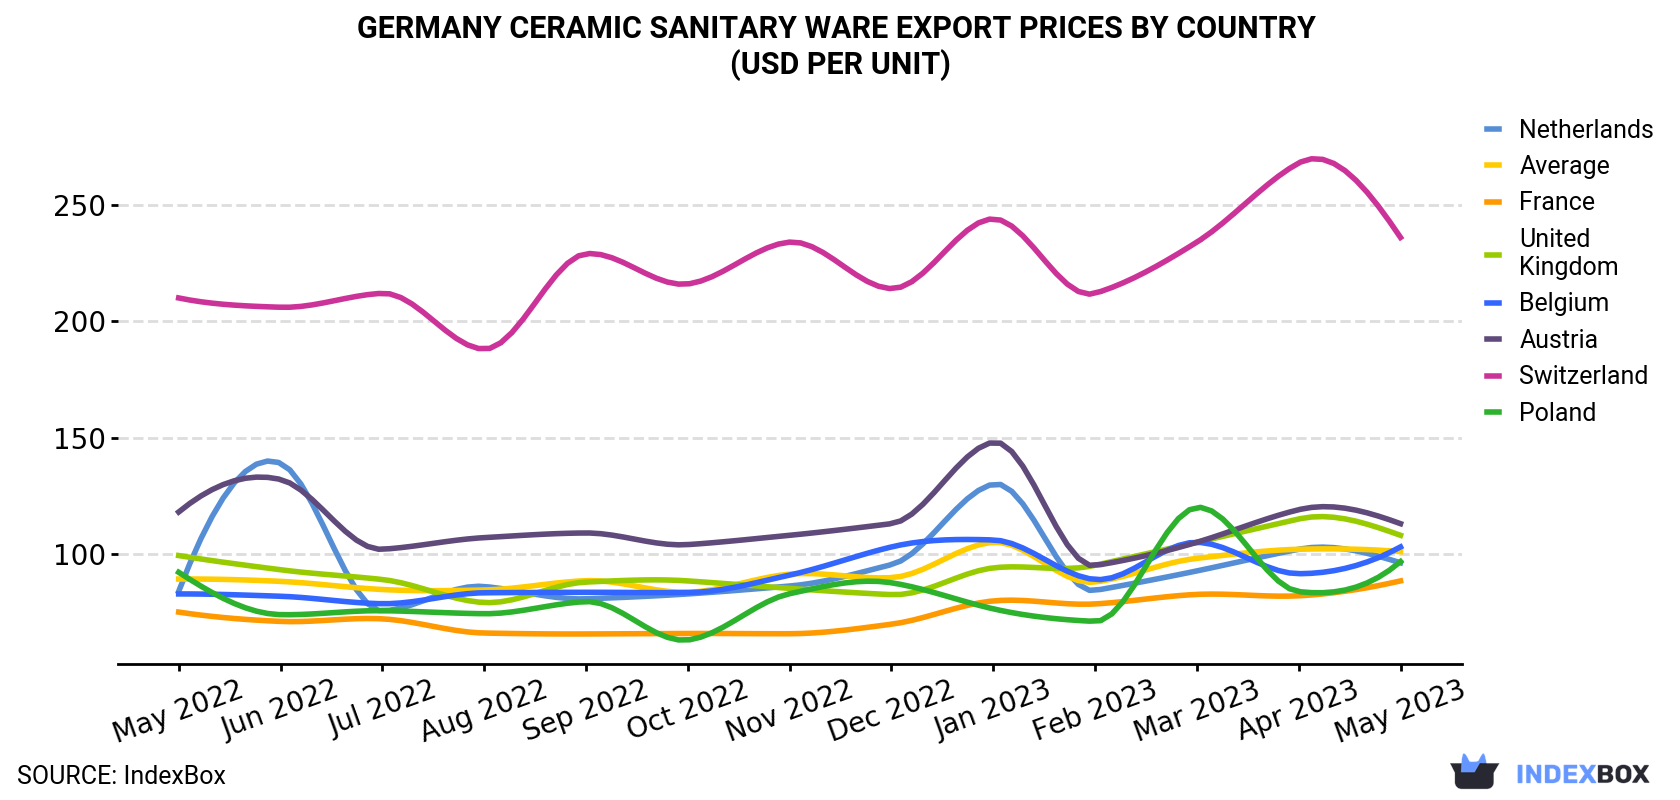 Germany Ceramic Sanitary Ware Export Prices By Country (USD Per Unit)